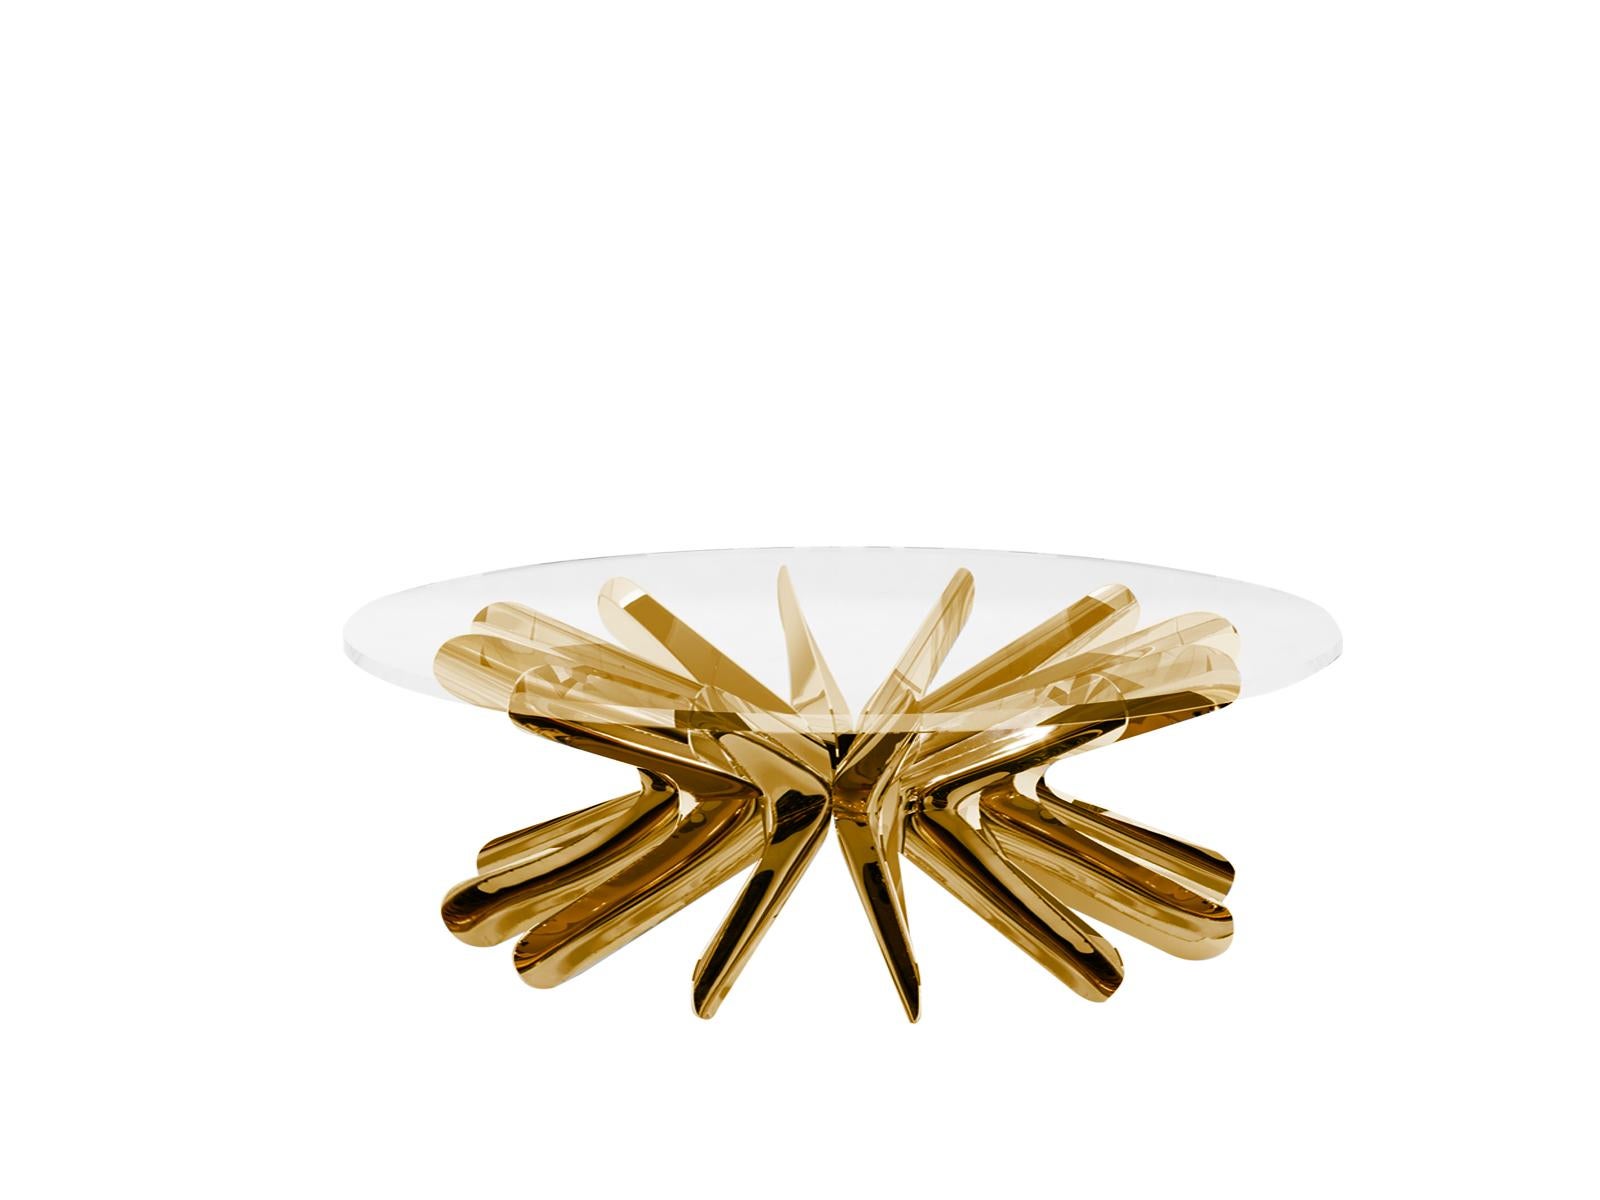 Organic Modern Contemporary Coffee Table 'Steel in Rotation No. 1' by Zieta, Large, Flamed Gold For Sale